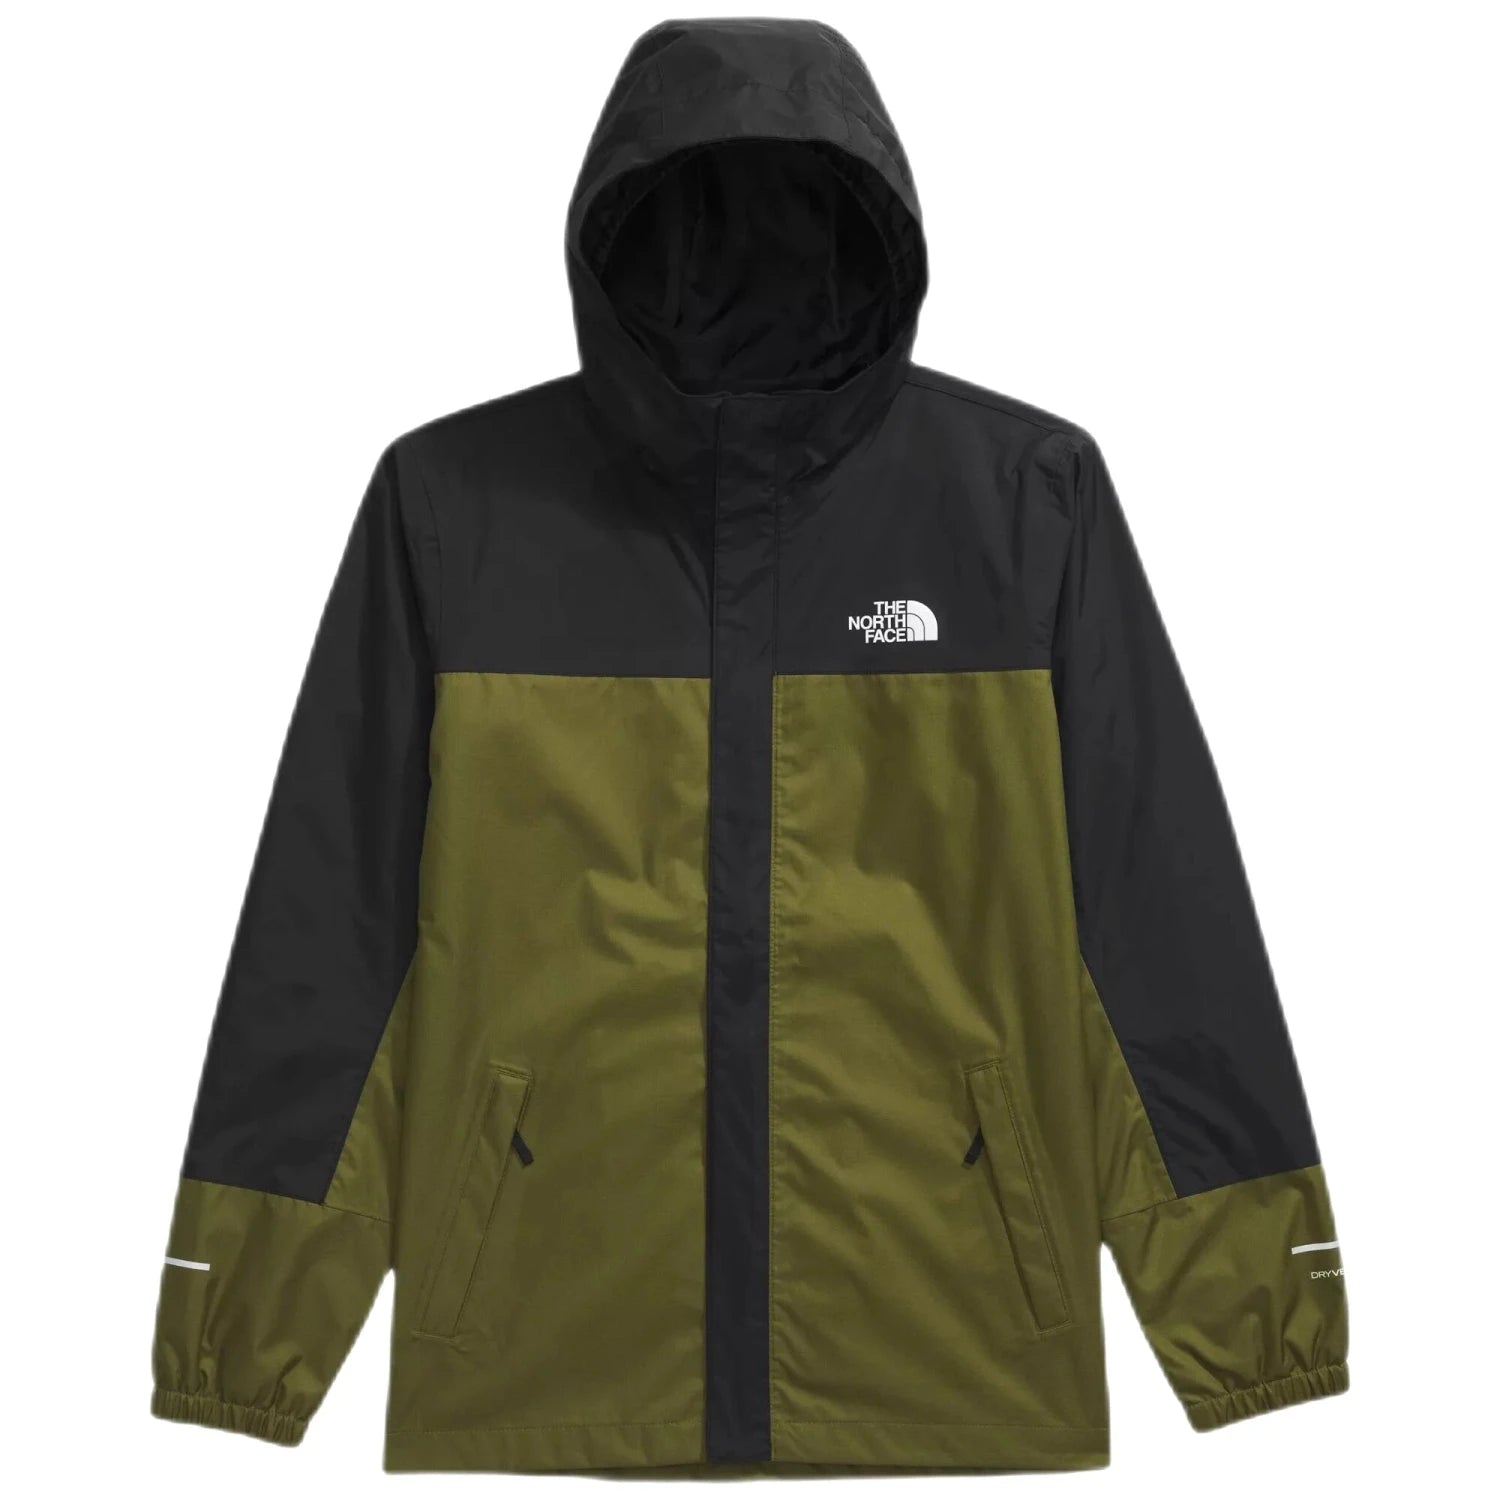 The North Face Boys' Antora Rain Jacket Forest Olive Flat Front